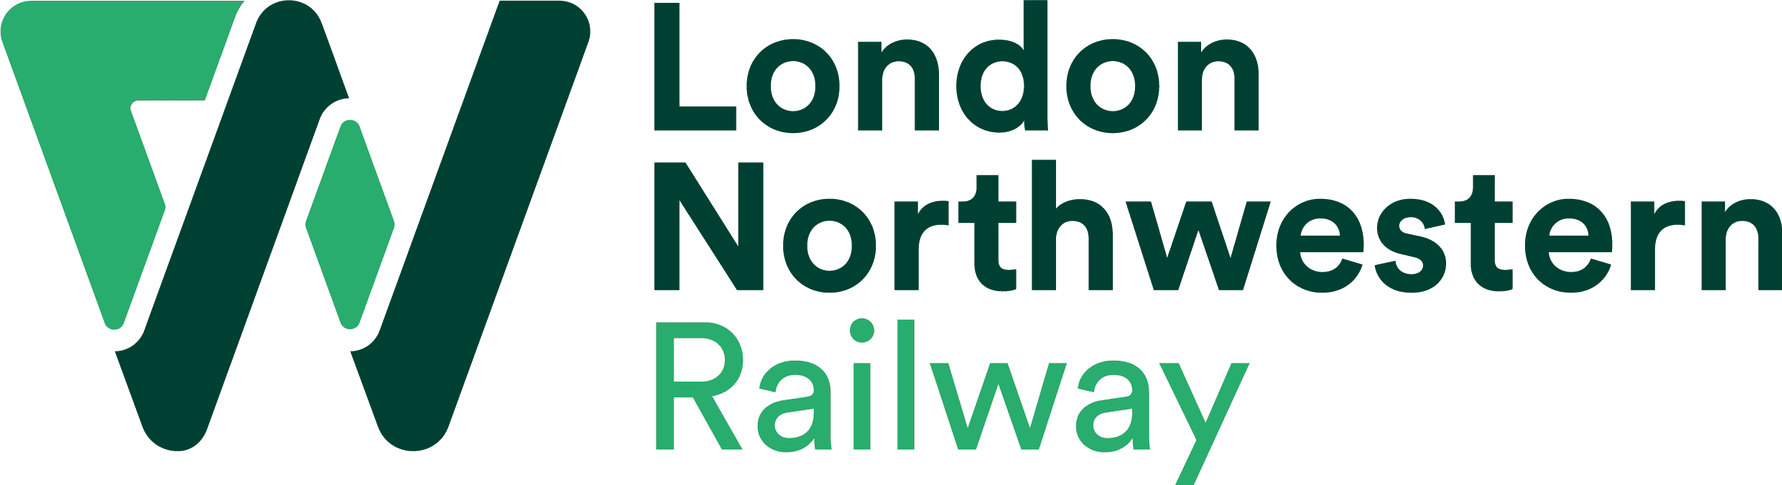 London Northwestern Railway lifts restrictions to help pensioners and disabled access essential supplies as revised timetable begins